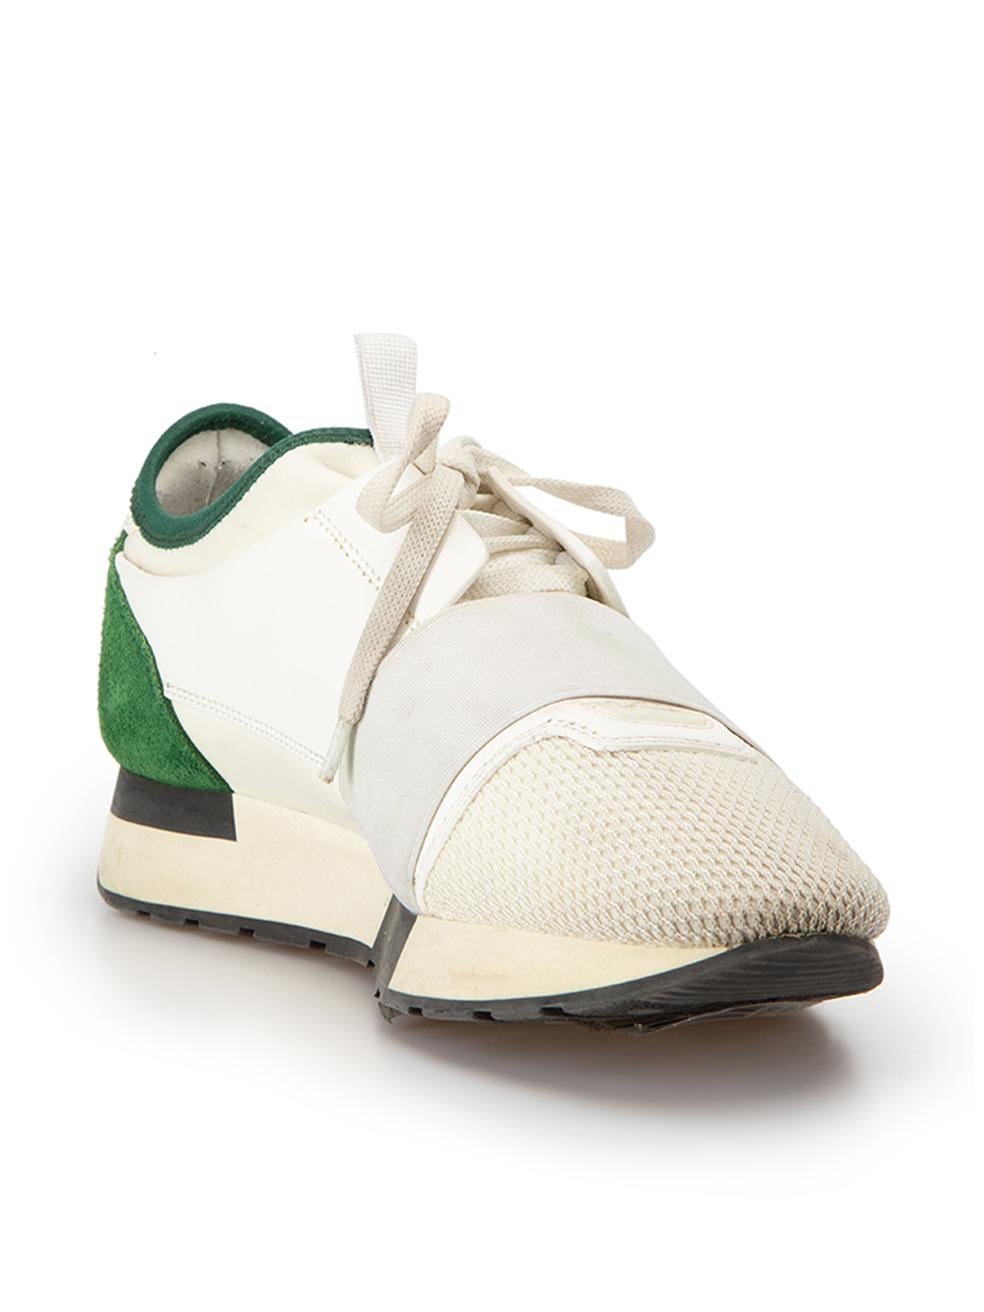 CONDITION is Good. General wear to shoes is evident. Moderate signs of wear to elastic straps on both shoes and mesh with discolouration throughout both, slight scuffing to side panels on both shoes and soles on this used Balenciaga designer resale